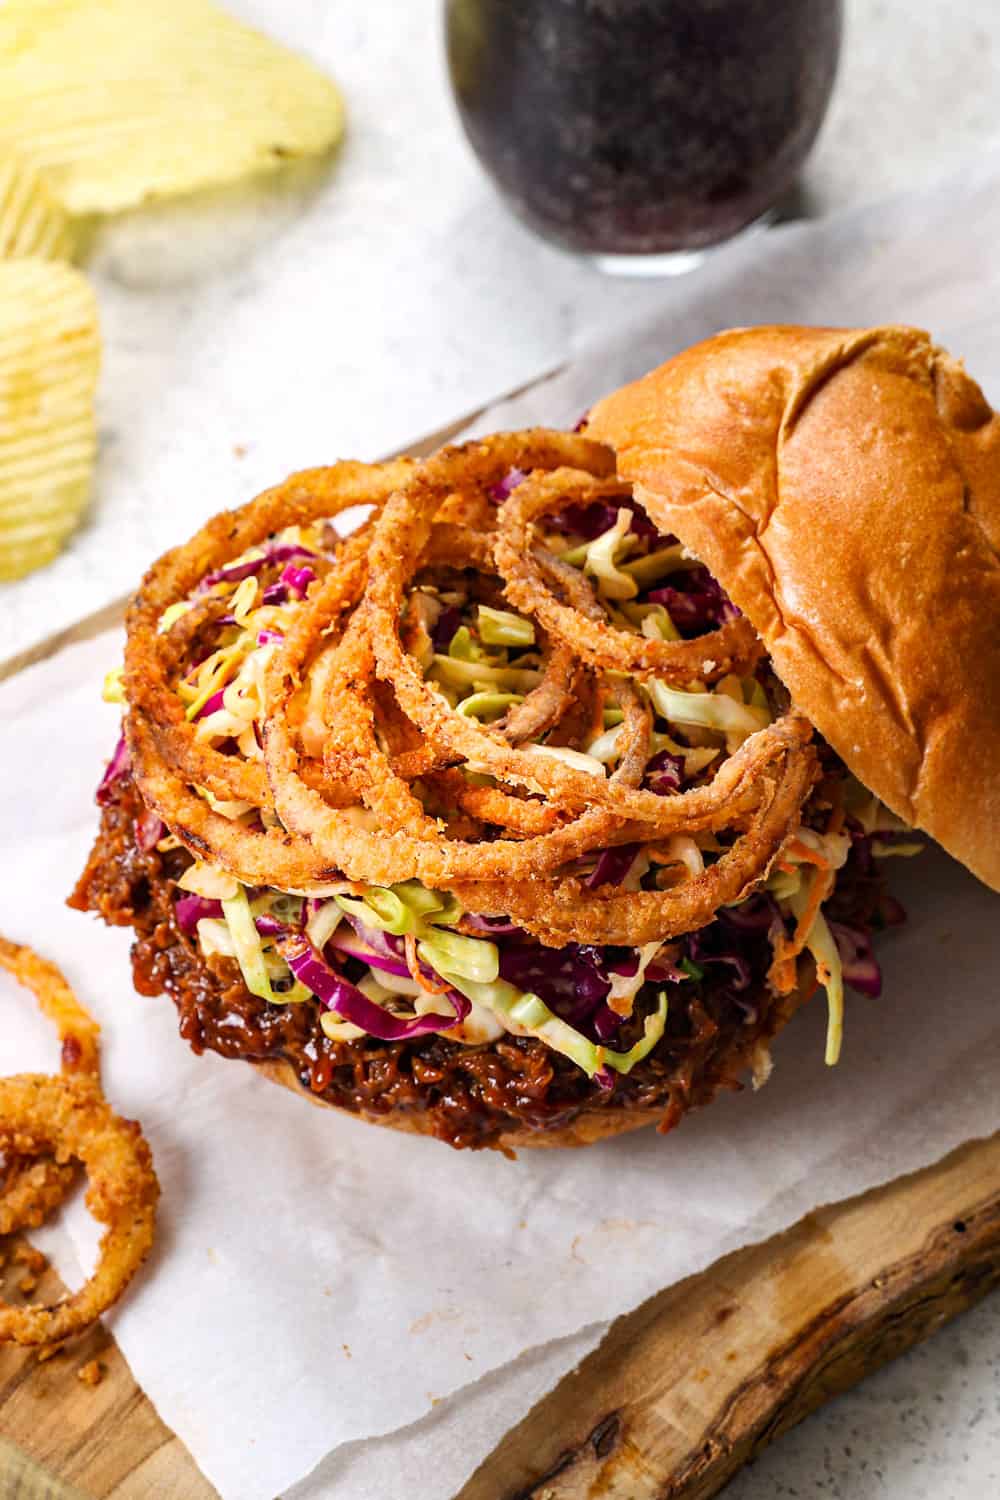 showing how to make BBQ pulled pork sandwiches by adding coleslaw and fried onion rings to BBQ pulled pork